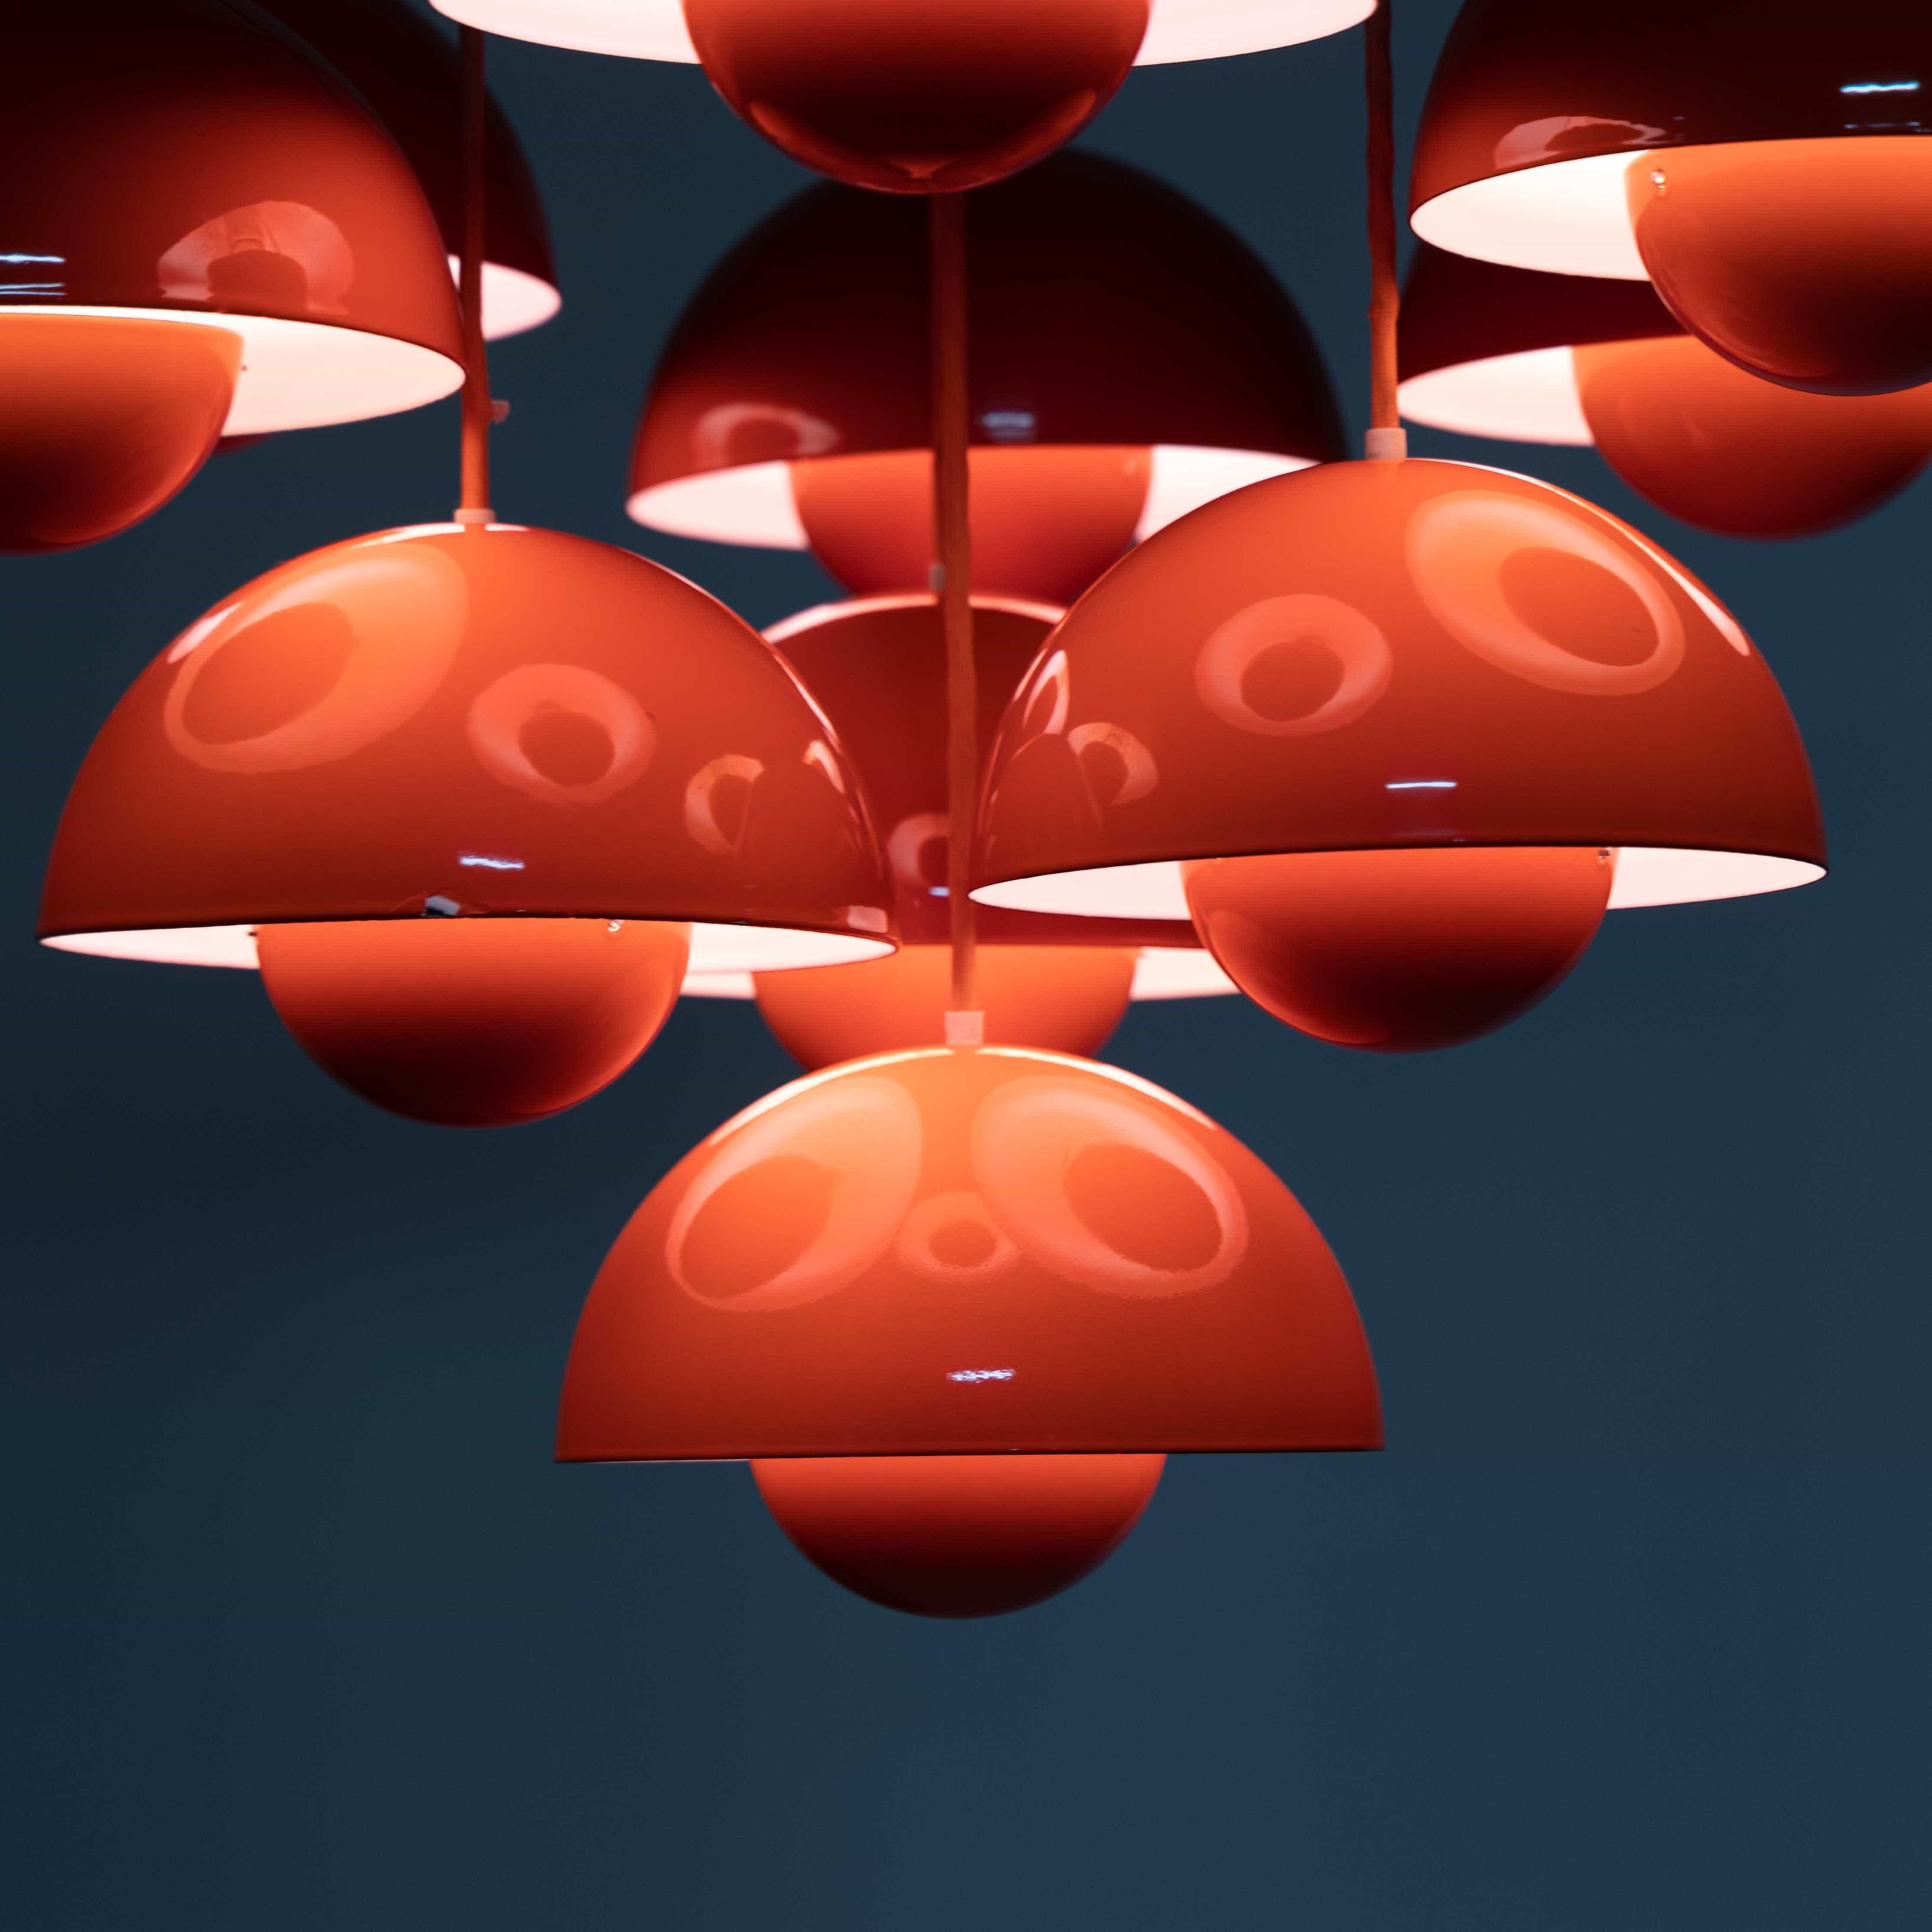 Red chandelier consisting of ten Flower Pot pendant lights designed by Verner Panton for Louis Poulsen in 1968. The Flower Pot lights are mounted in different lengths on a red, square perforated plate. This combination was produced in 1971/72 for